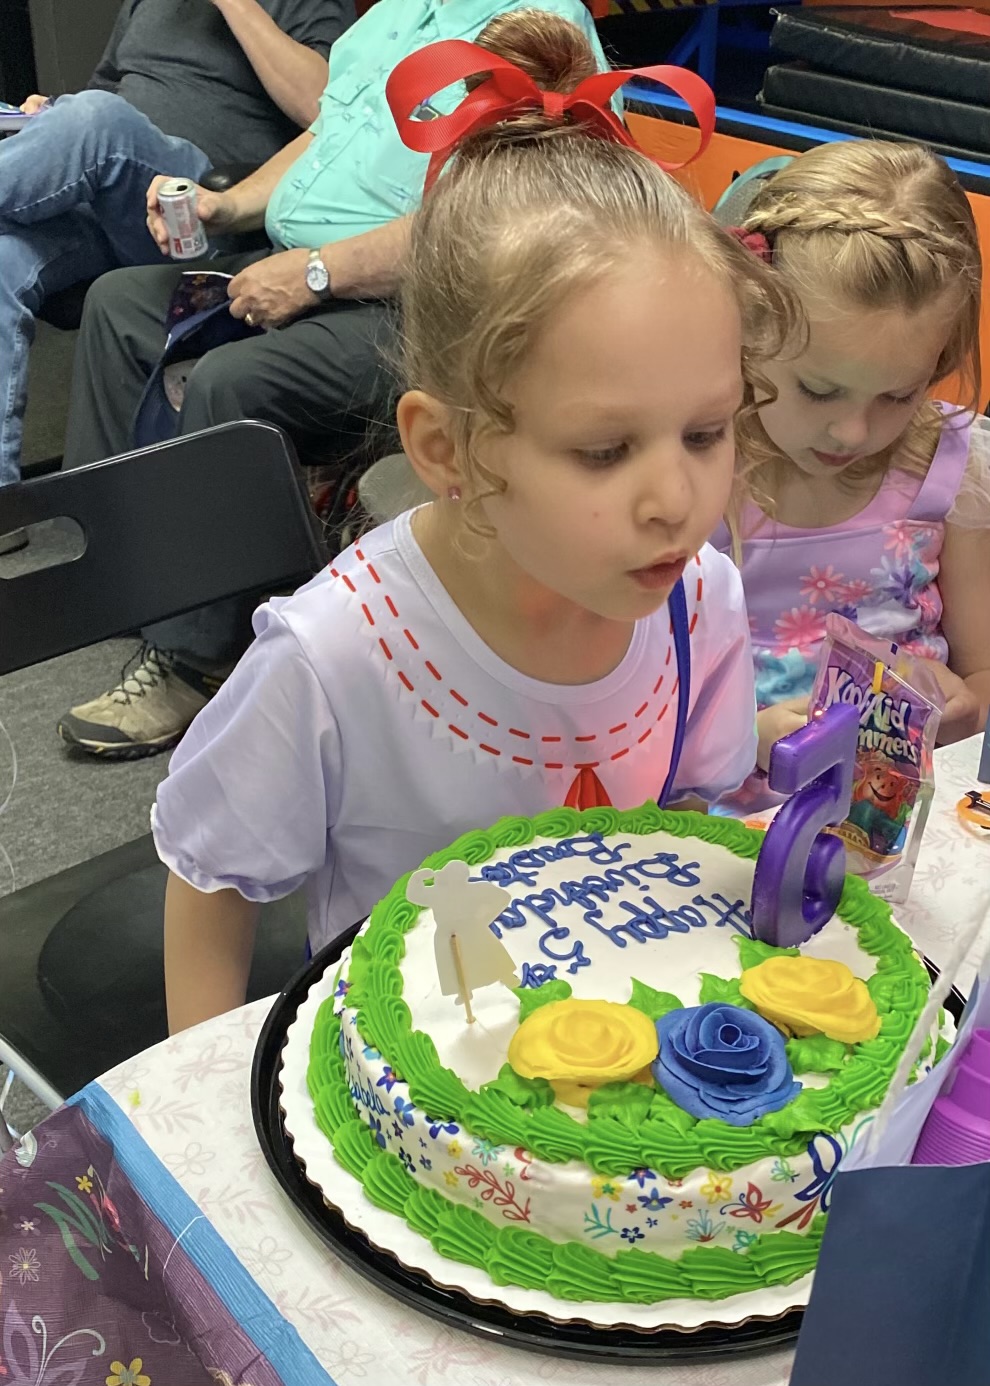 Child blowing out birthday candles